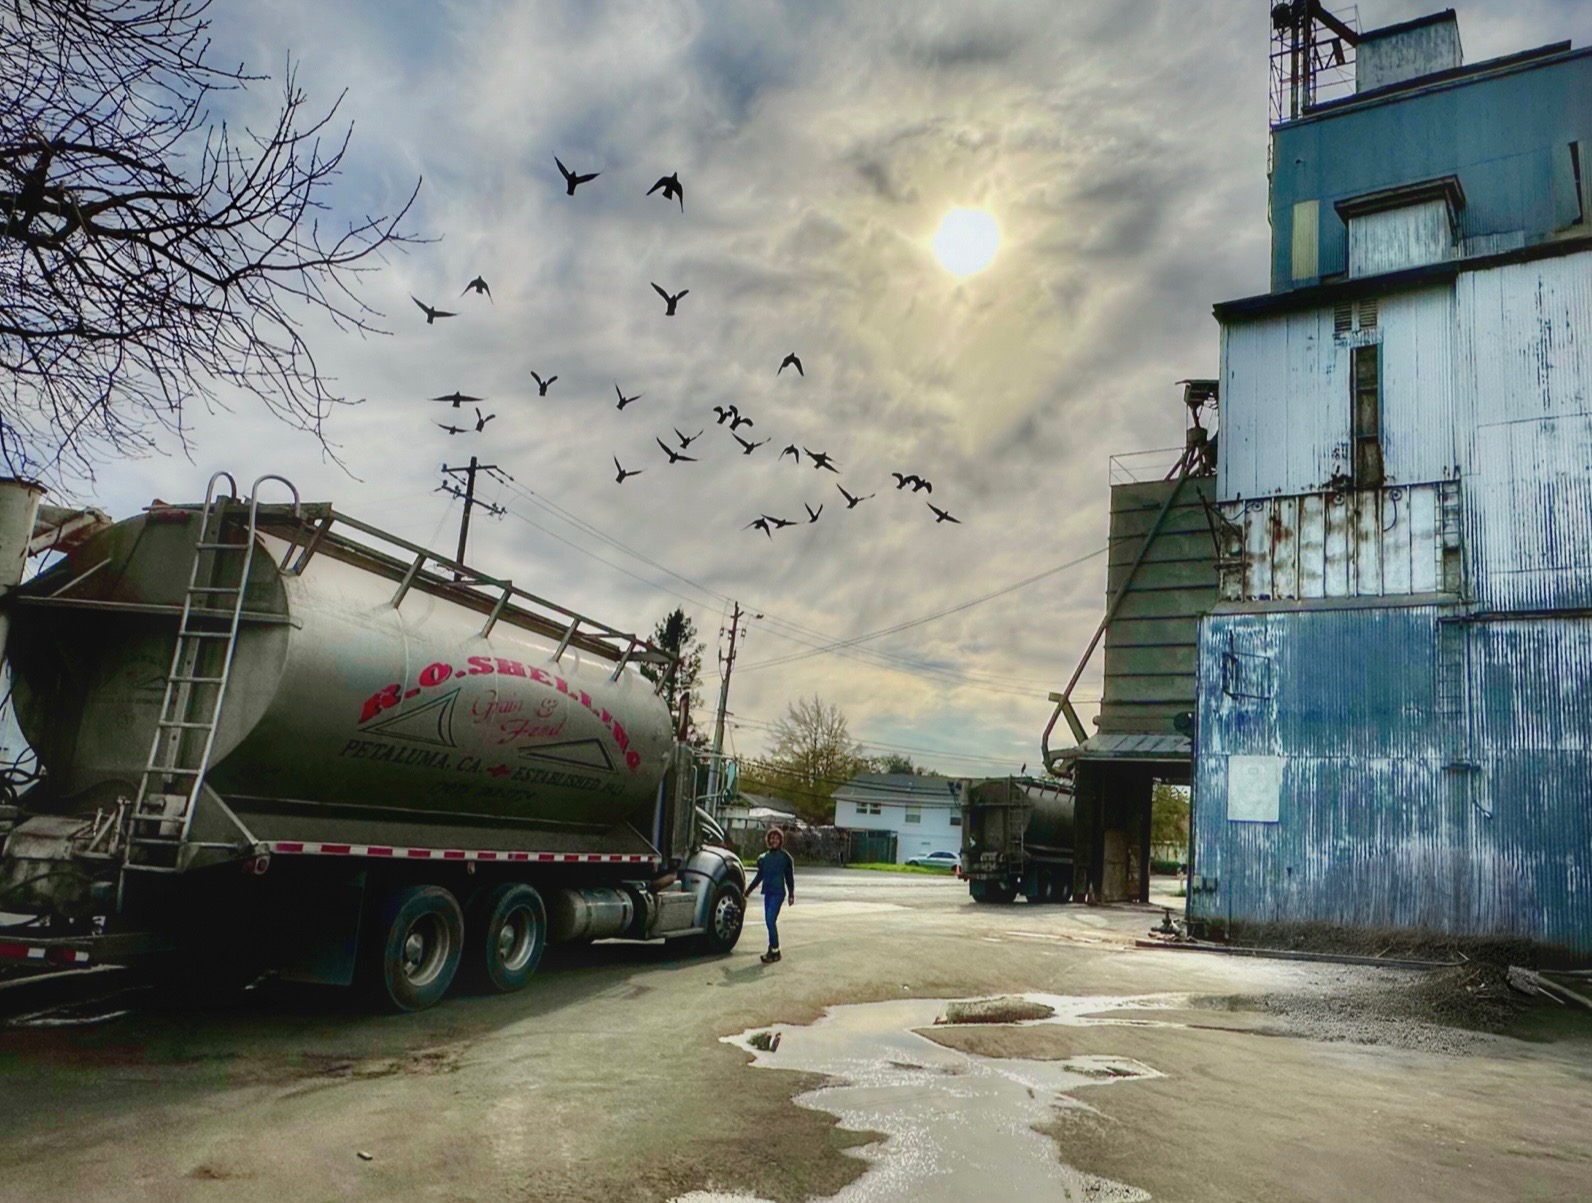 A man is standing next to a truck with birds flying around it.